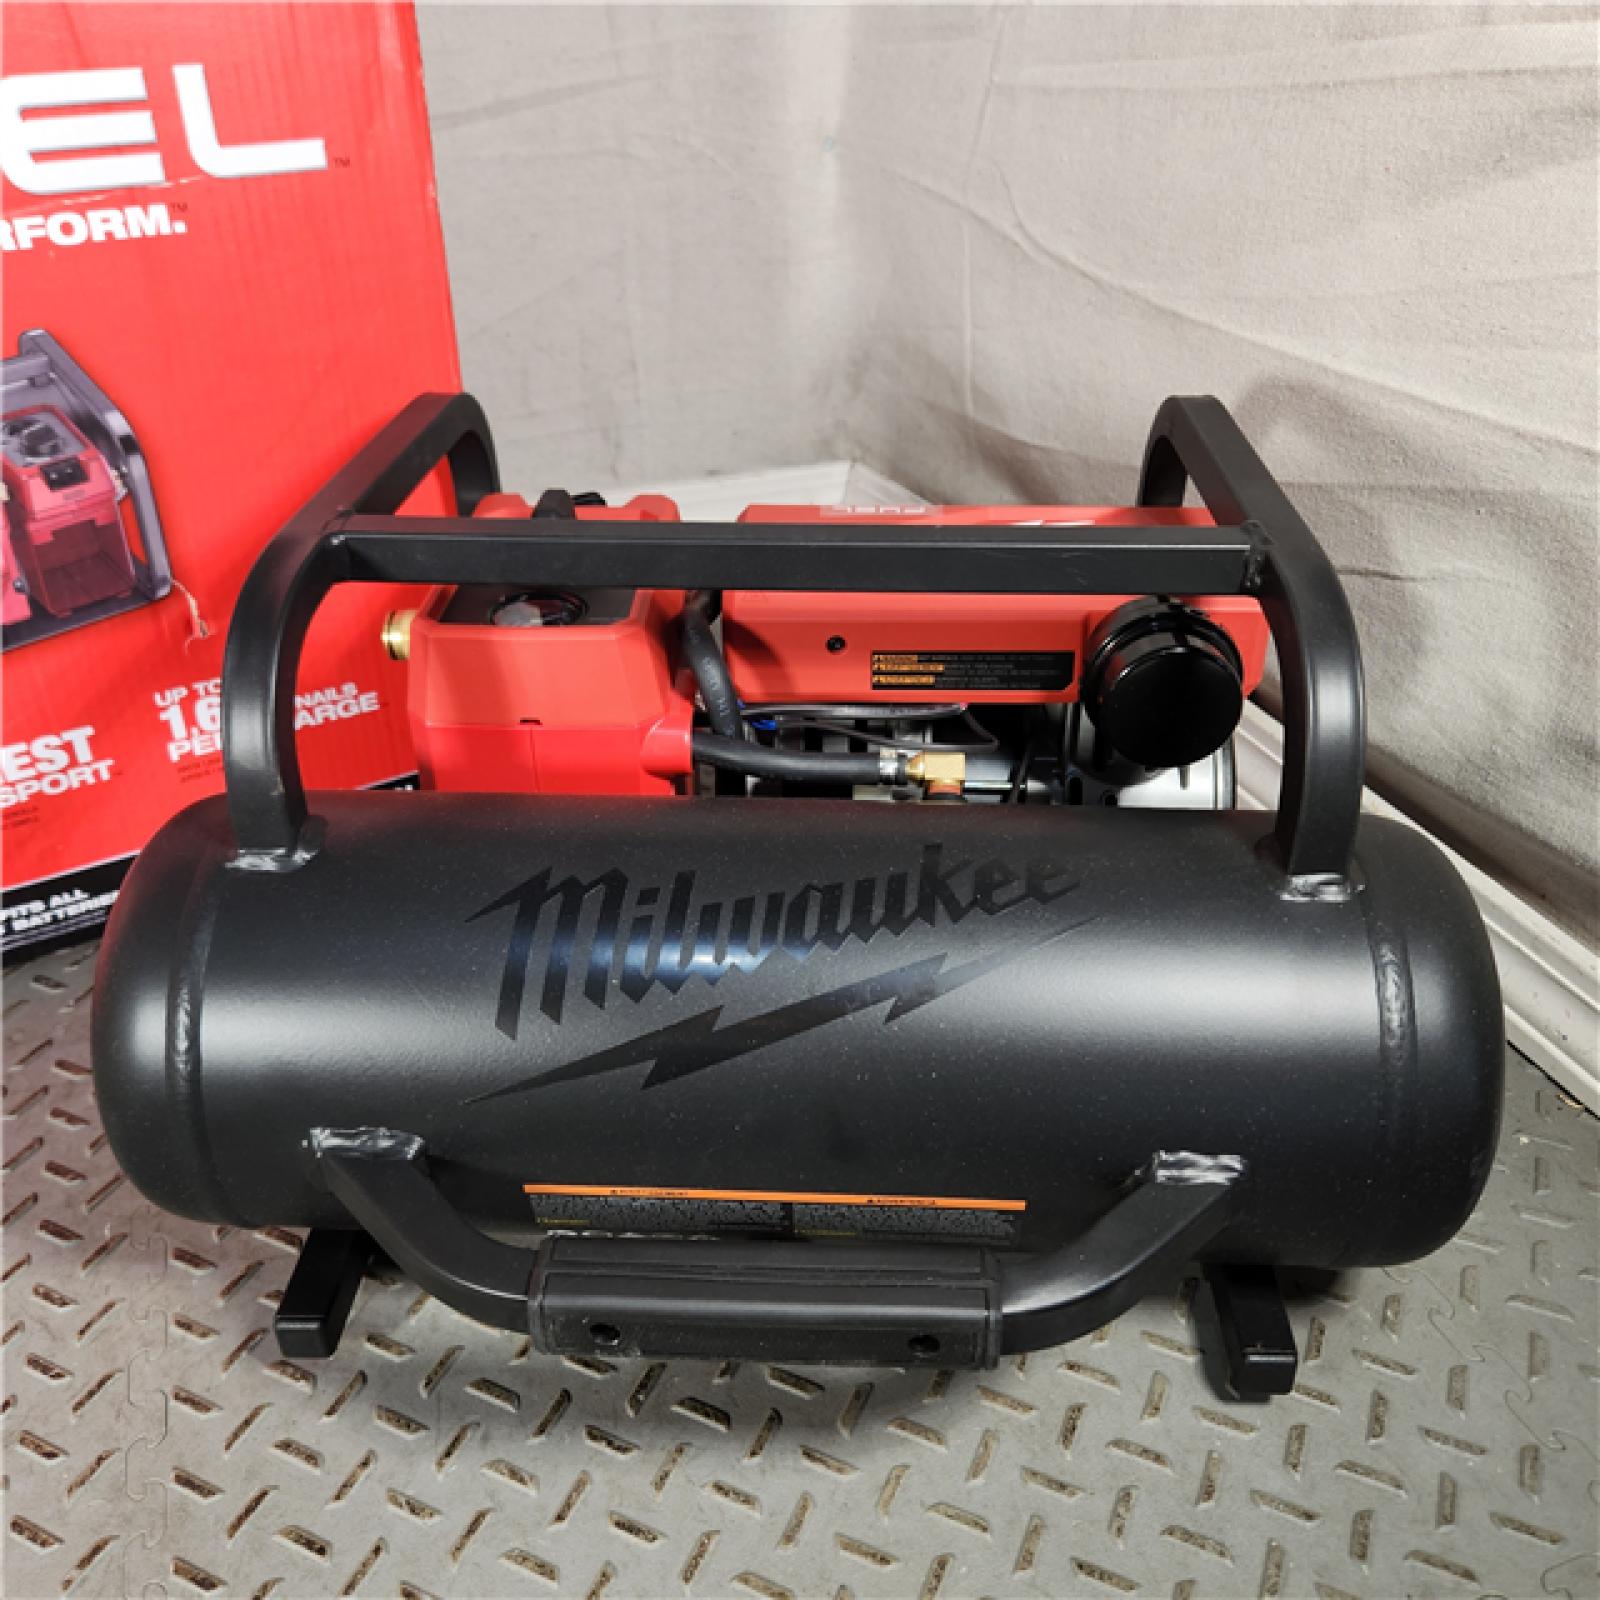 Houston location- AS-IS Milwaukee M18 FUEL 2 Gallon Compact Quiet Compressor (TOOL-ONLY)